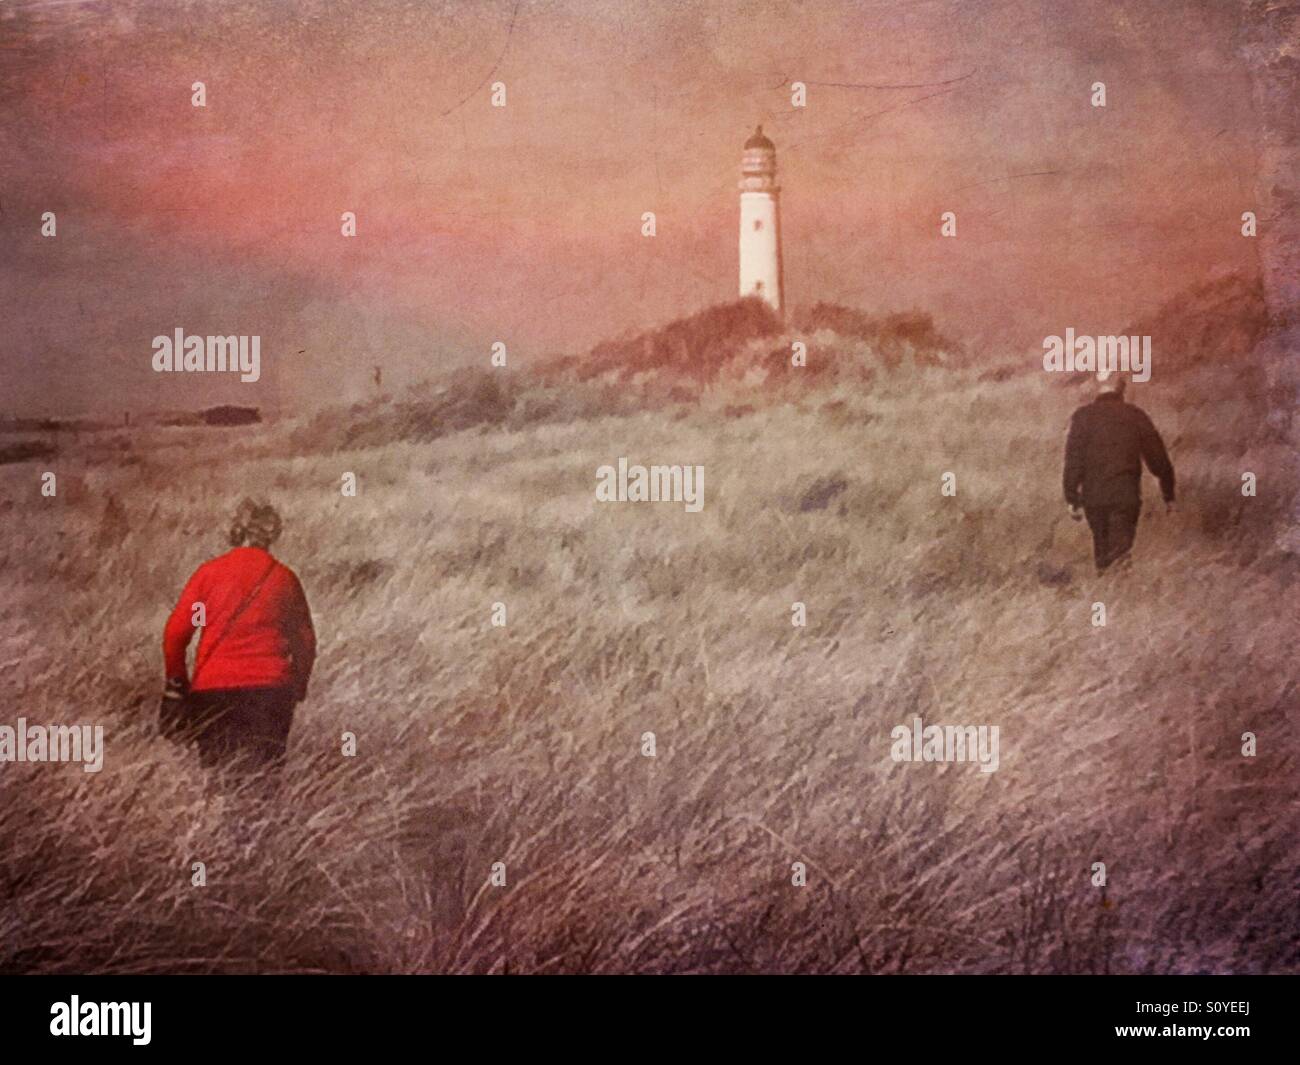 Making your way to the lighthouse. People walking the path through the dunes. Stock Photo